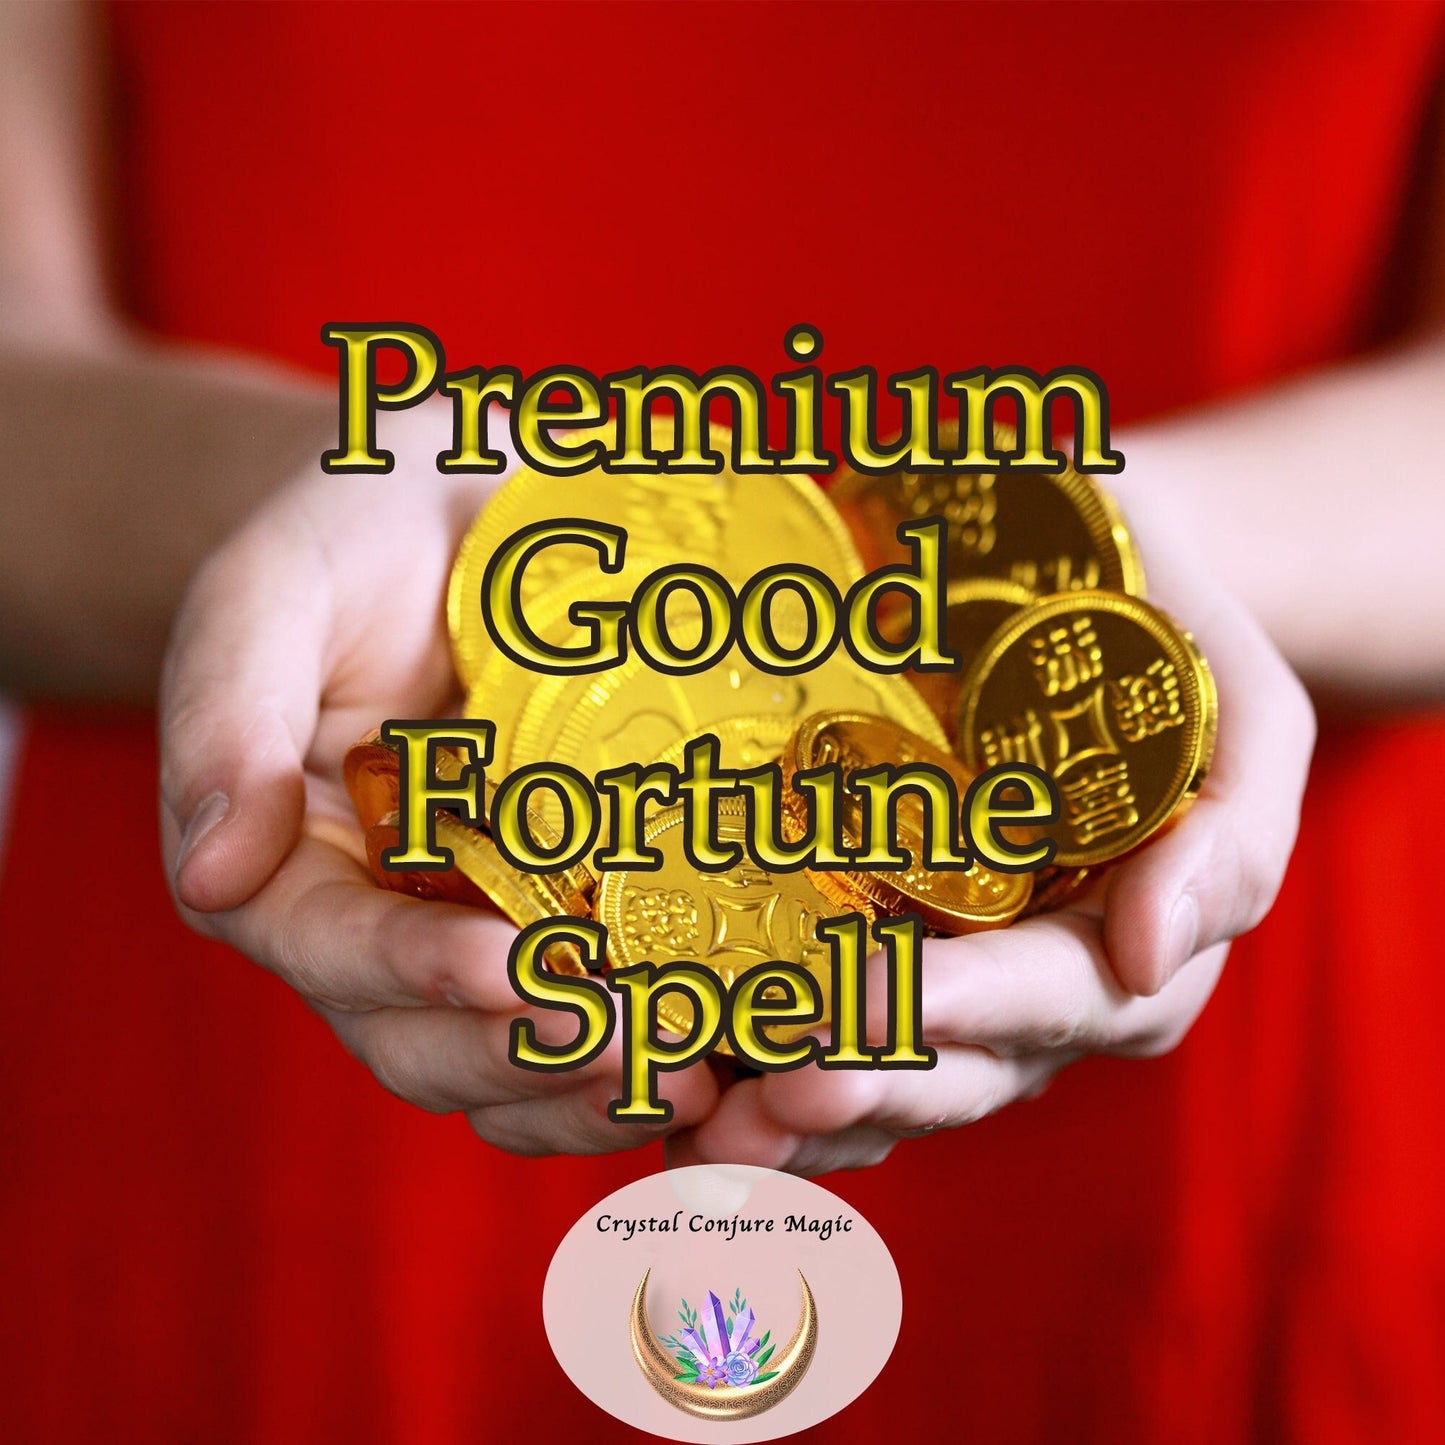 Premium Good Fortune - The spell of perseverance, resilience, fortitude, fortune, bravery, and success